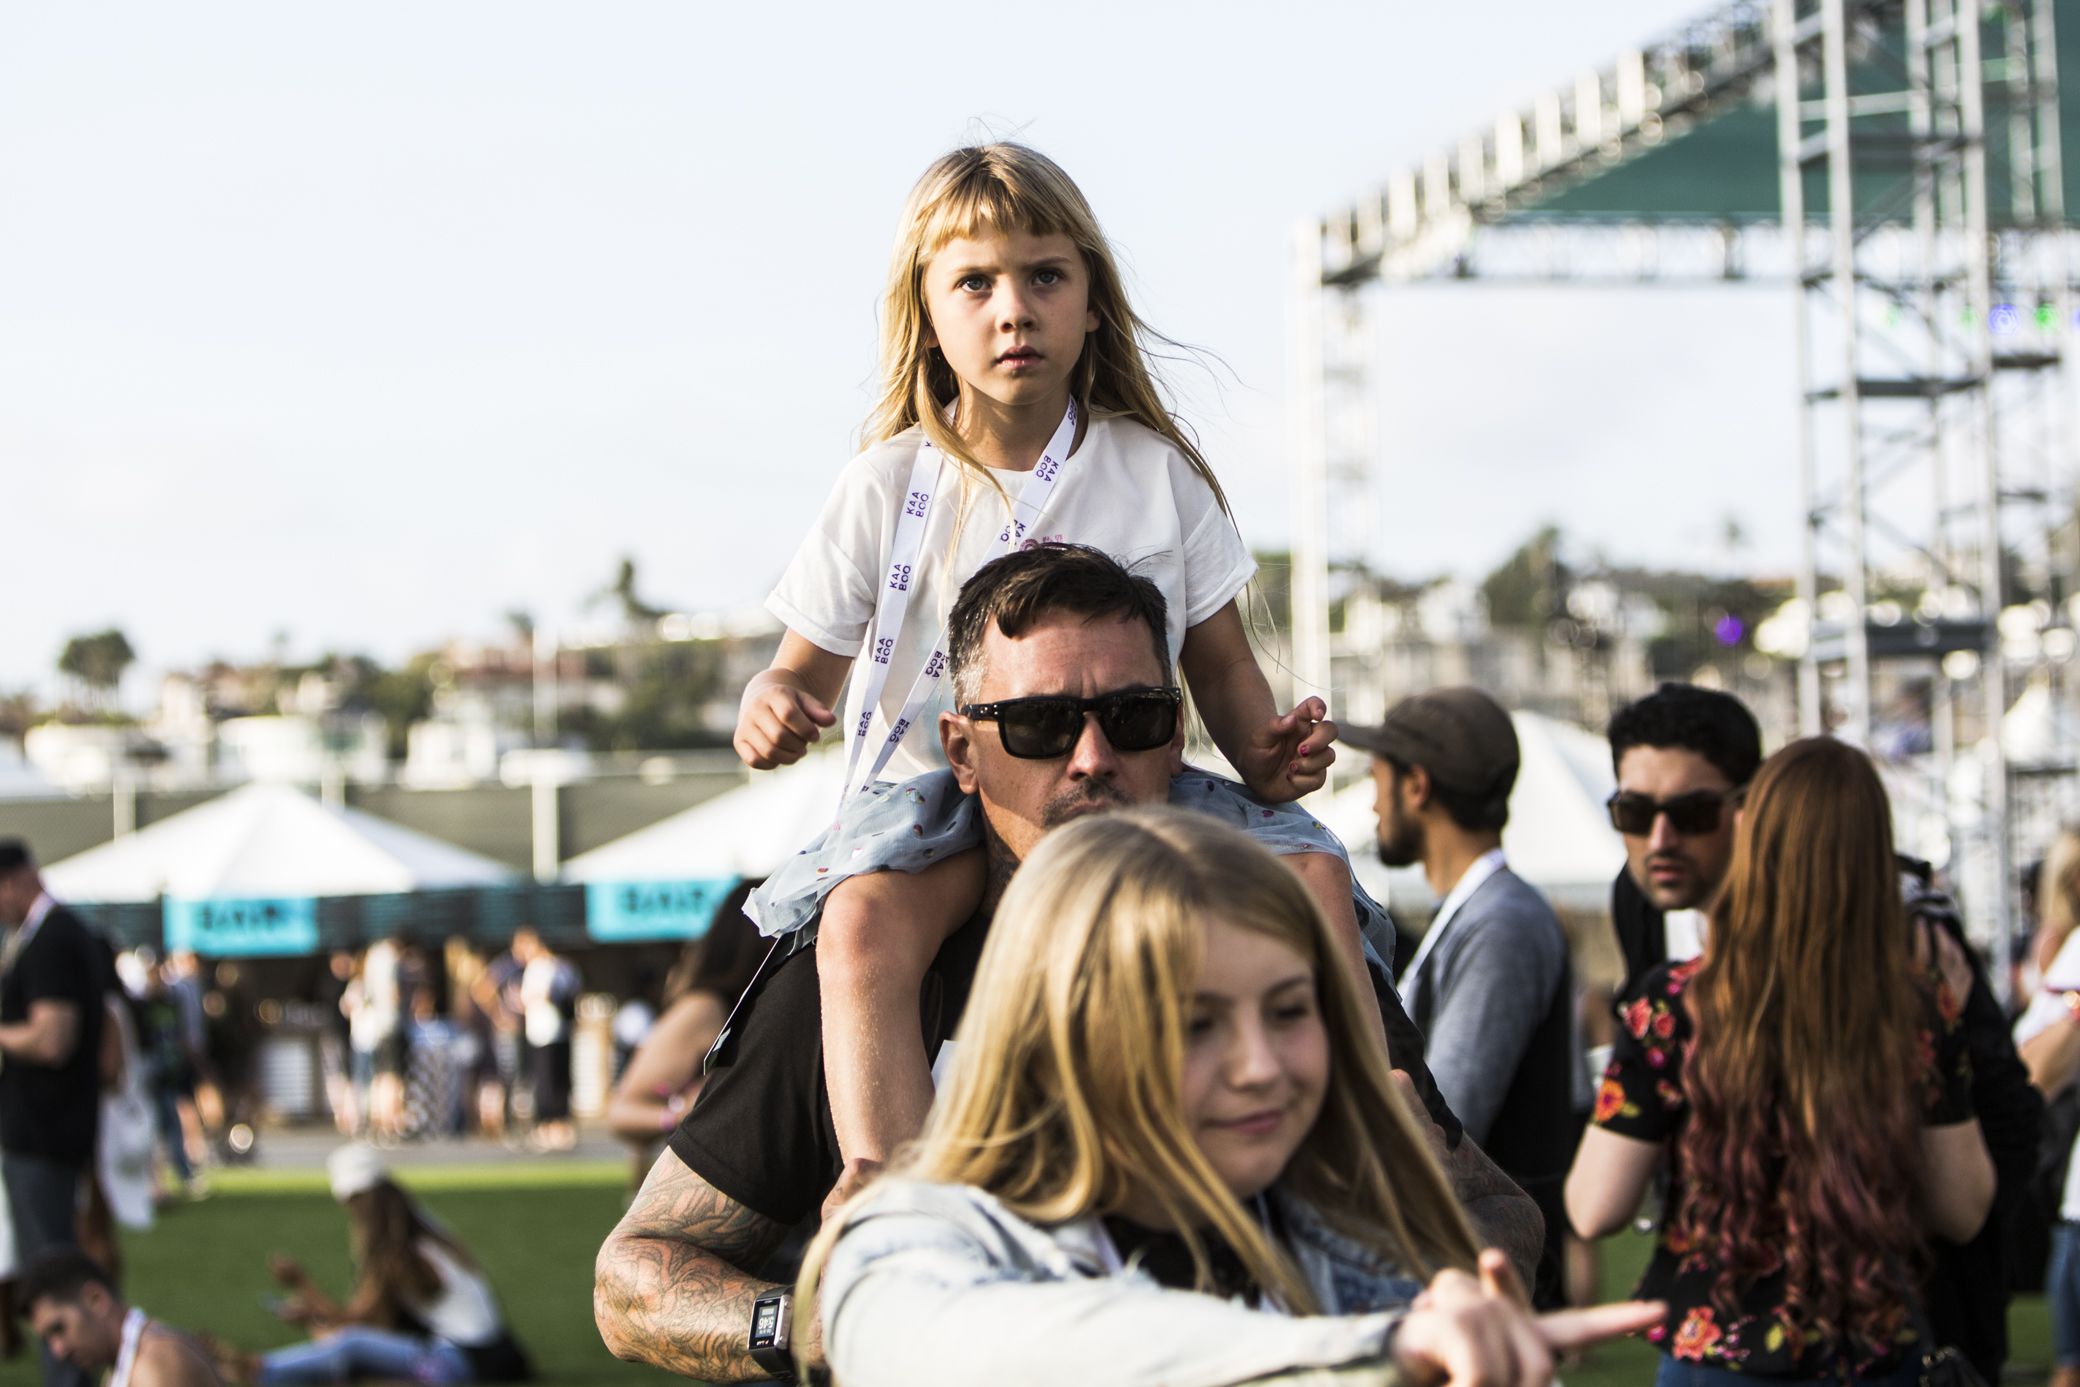 kaaboo 3 2 KAABOO Del Mar Succeeds at Being a Festival for Everyone